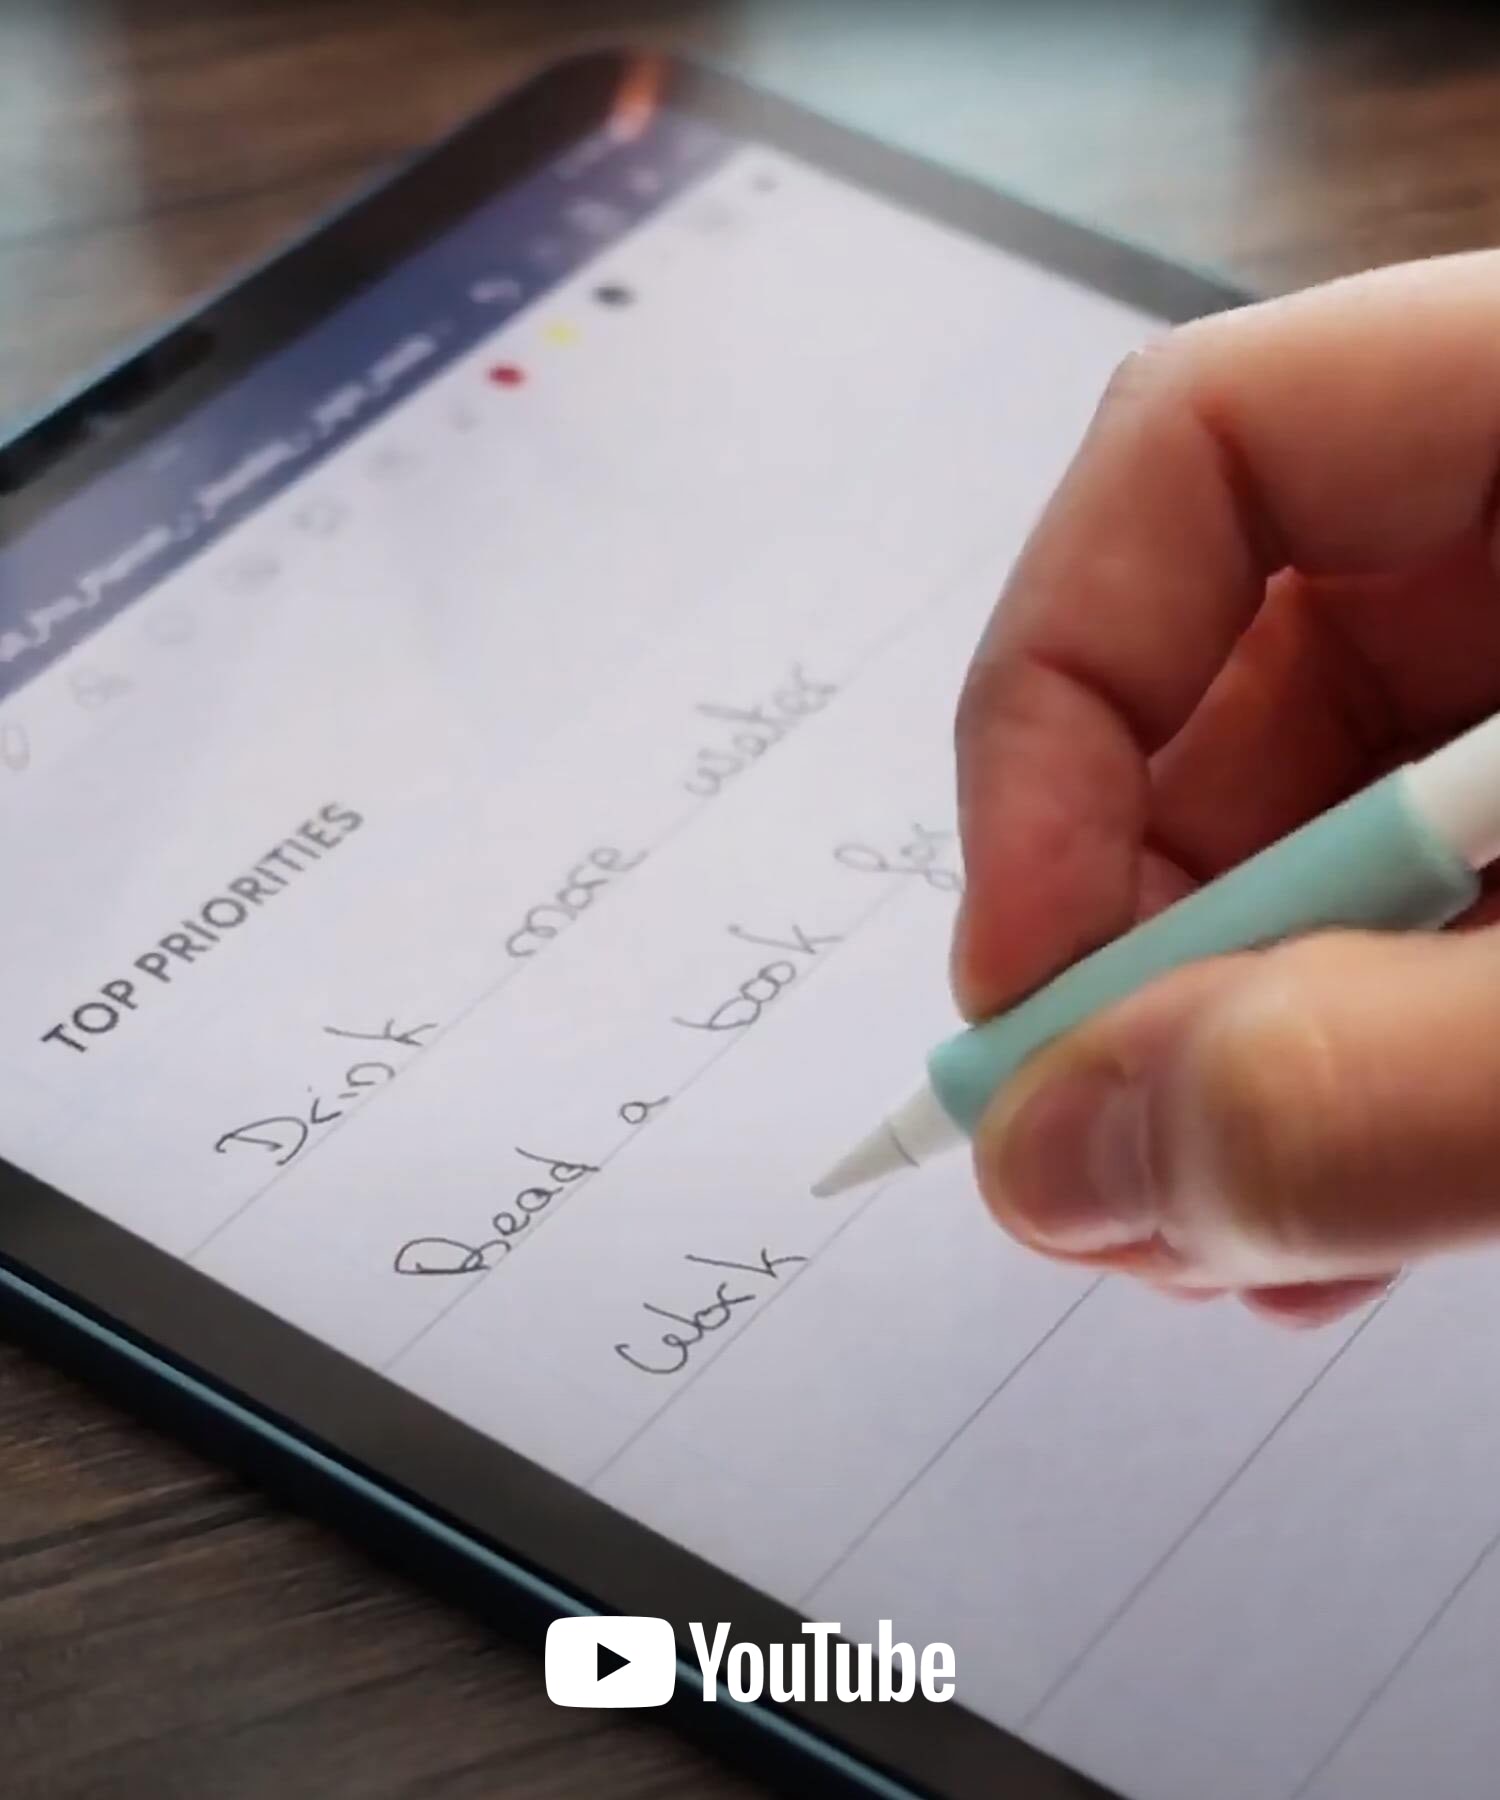 A close-up of a hand holding an Apple Pencil with a mint green pencil grip writing a list of top priorities with the YouTube logo at the bottom.